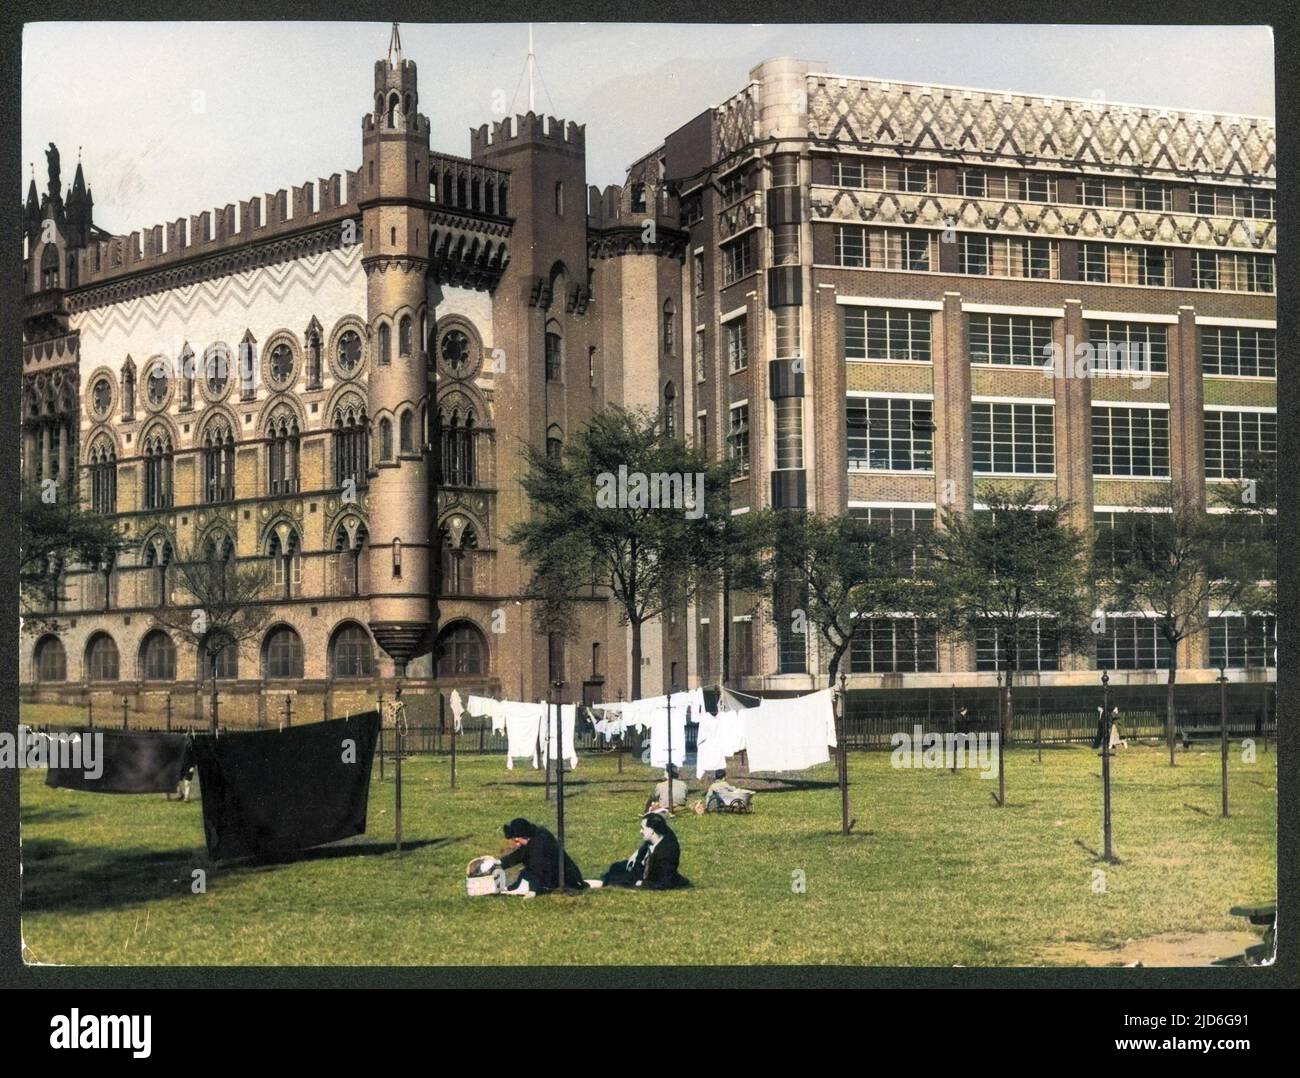 The only public laundry 'Drying Ground' in Scotland, on Glasgow Green. Behind is the John Templeton carpet factory, designed after the Doge's Palace, Venice. Colourised version of : 10171318       Date: 1950s Stock Photo